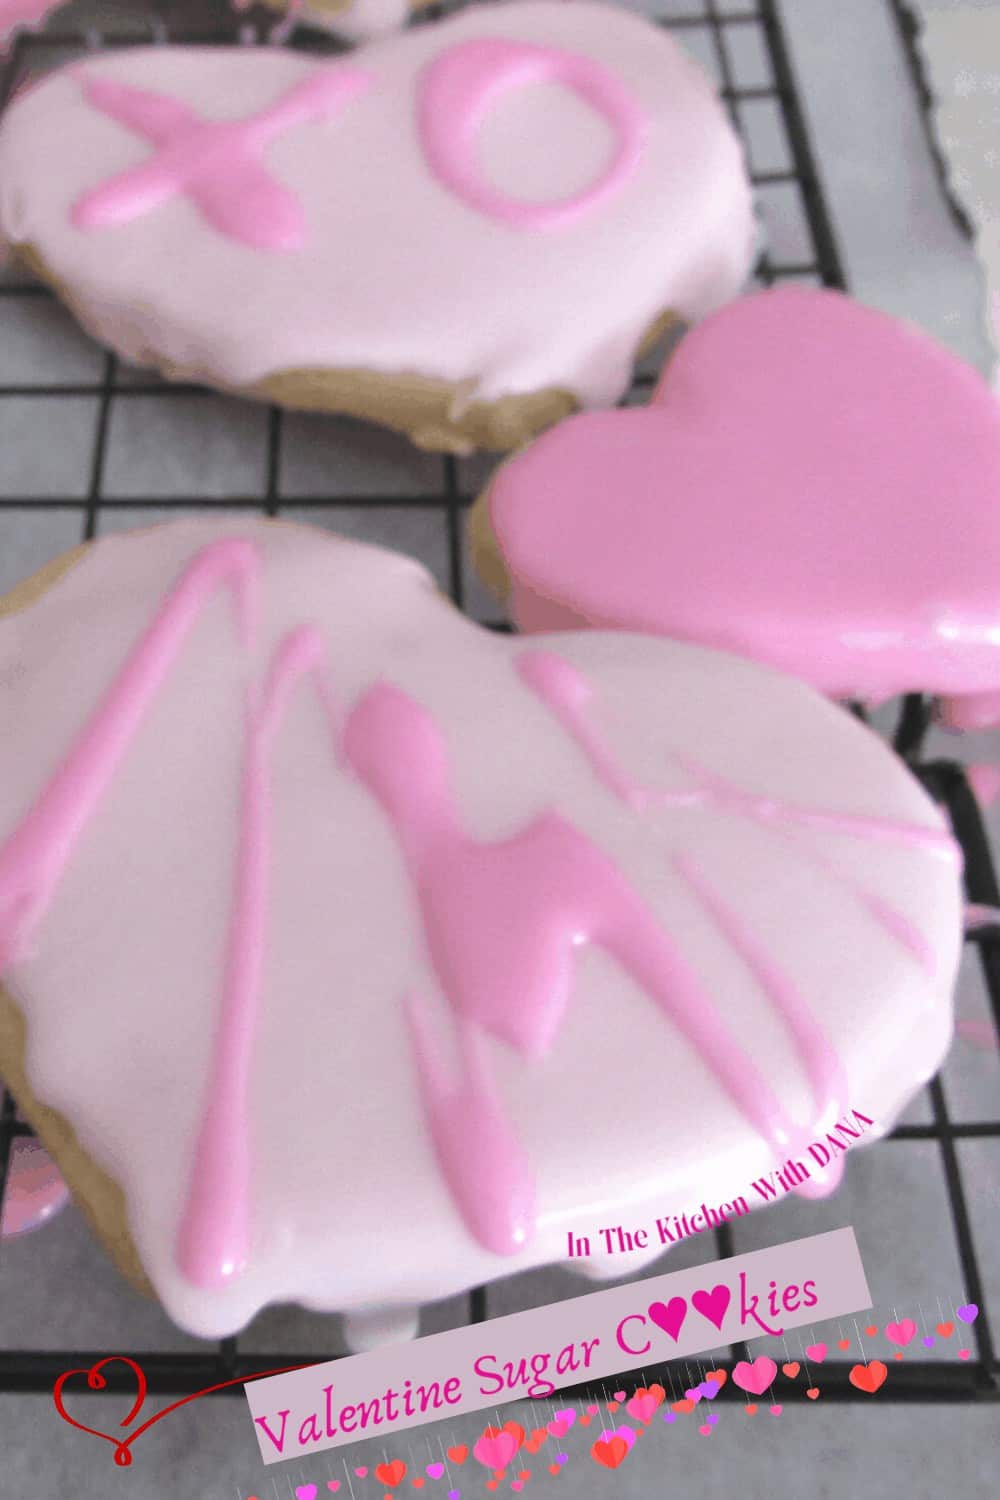 Sugar Cookies iced on rack Signature recipe for cut-outs and Valentine's Day